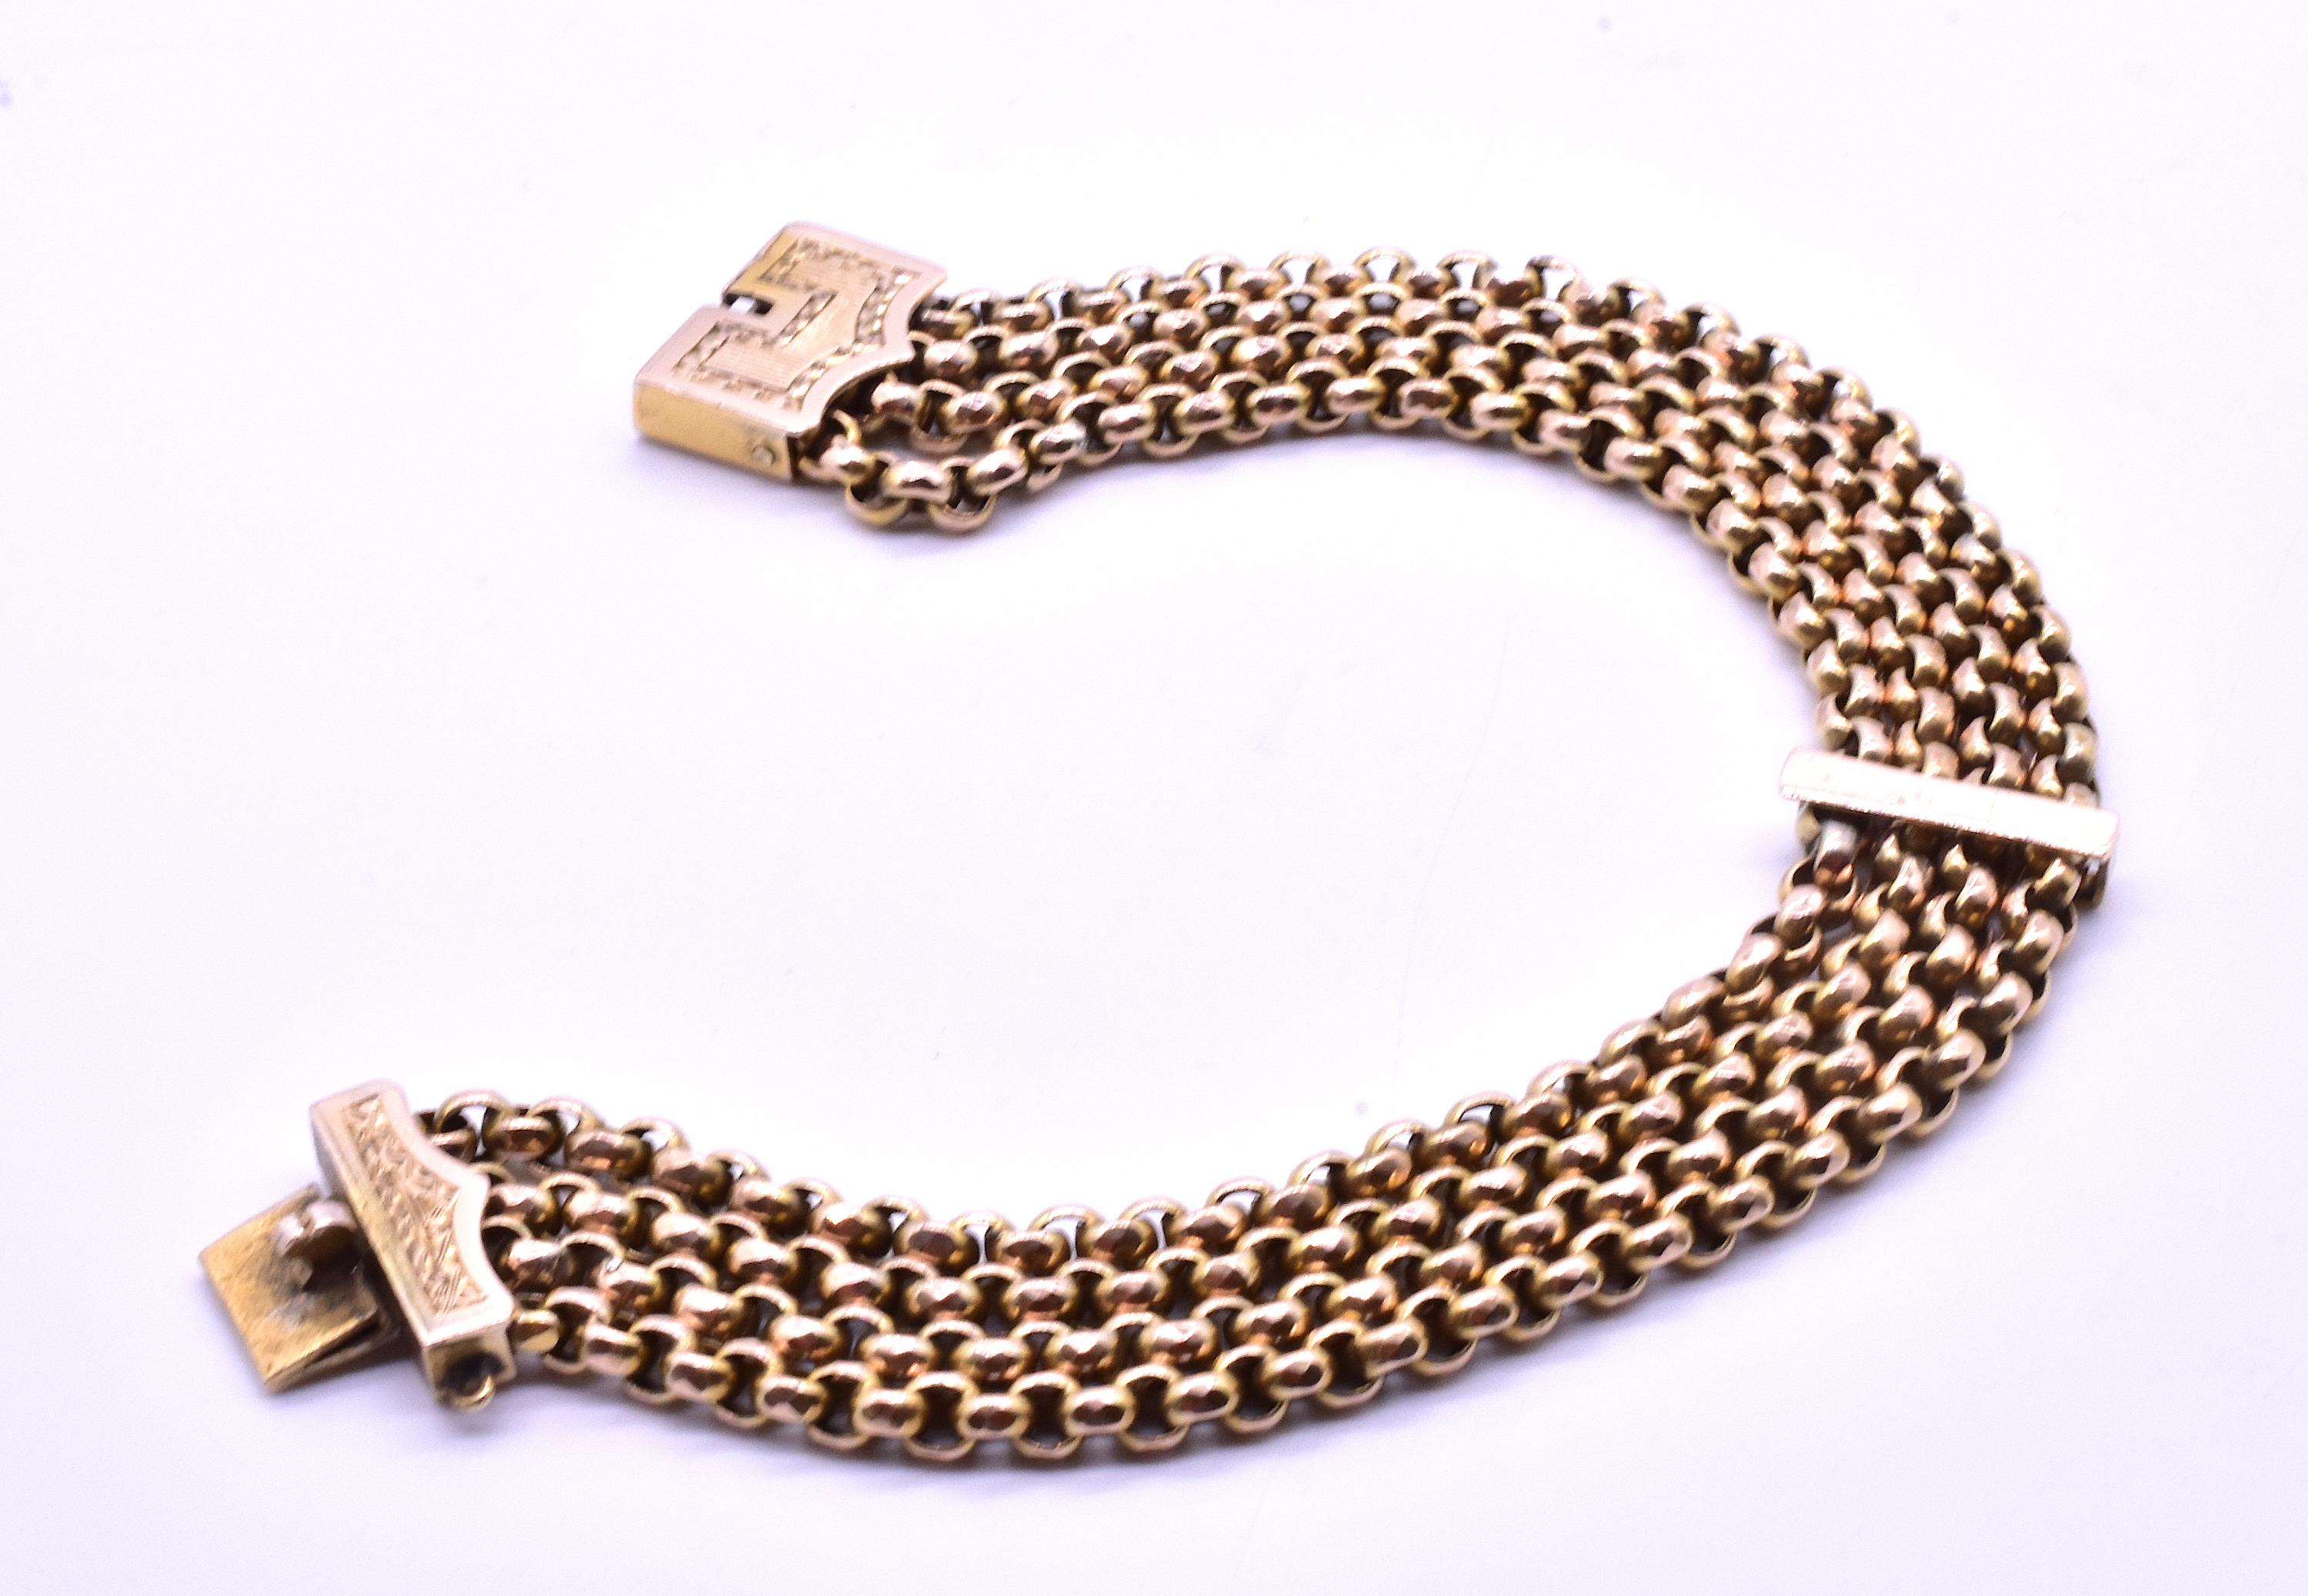 C1890 Belcher Chain bracelet with fancy engraved integral clasp. This bracelet is 7 inches long and .75 inches wide. The 9K gold construction makes it is especially sturdy and strong. And we are in love with the engaving on the clasp which makes the